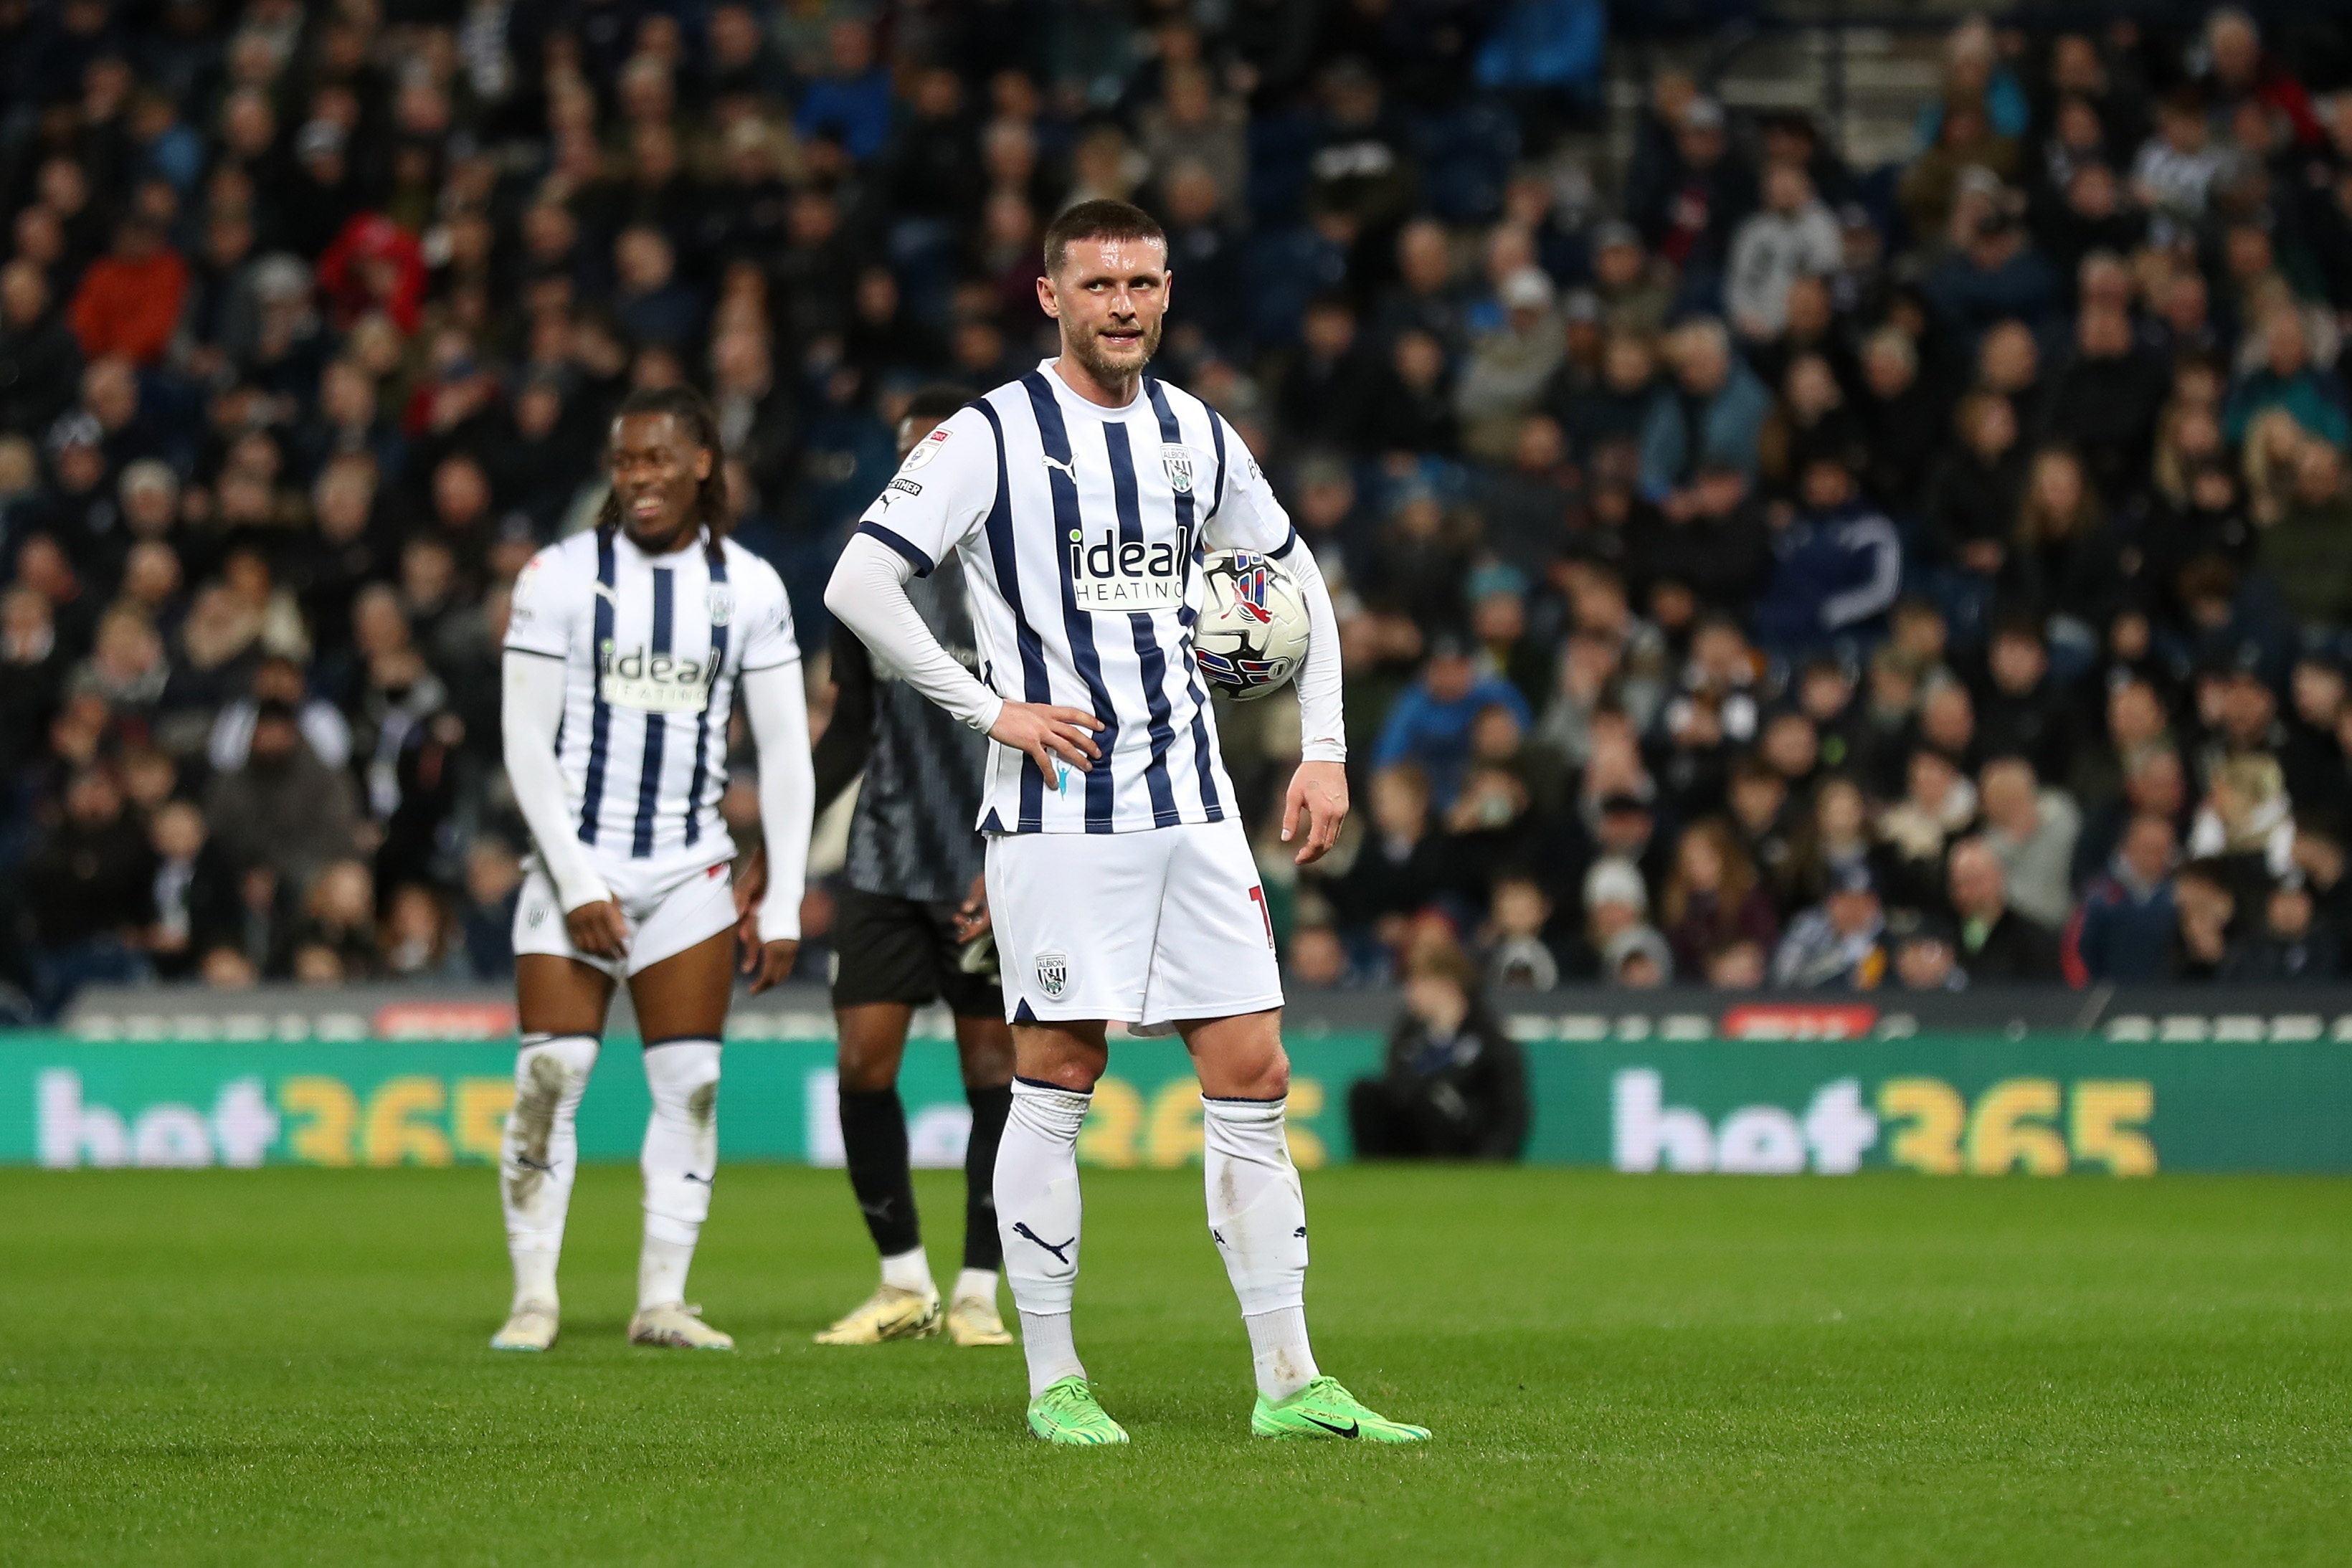 John Swift holding the ball preparing to take a penalty against Rotherham United at The Hawthorns